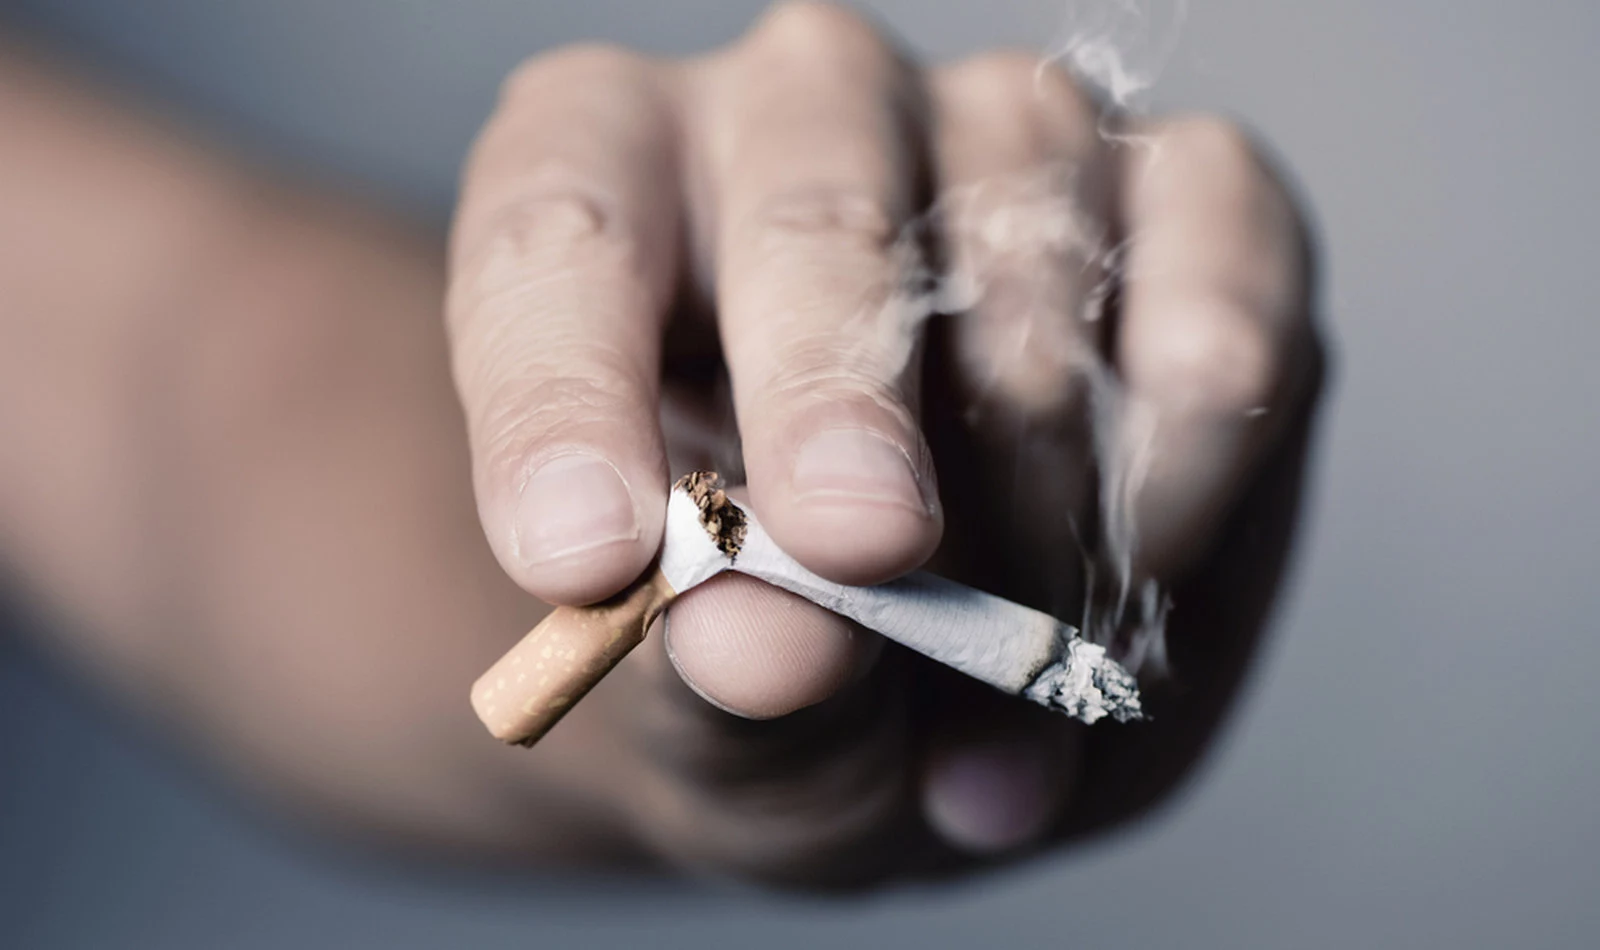 Smoking cessation counseling services in NYC